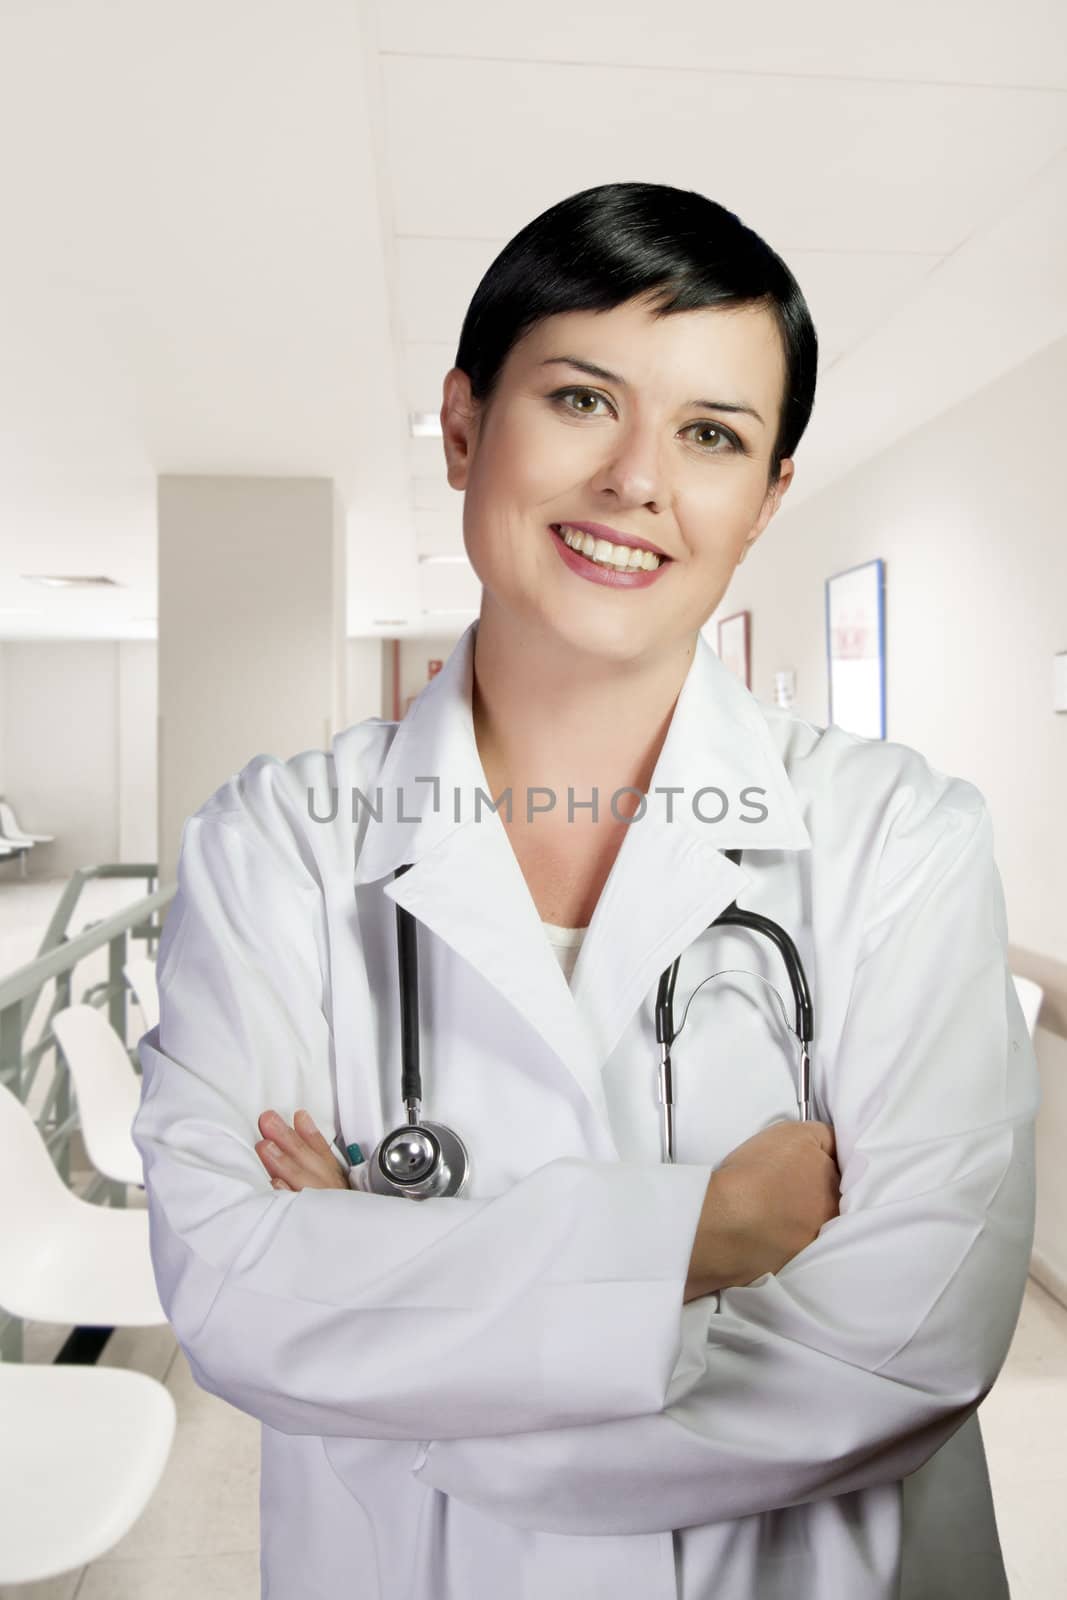 Woman with lab coat and stethoscope in a business environment